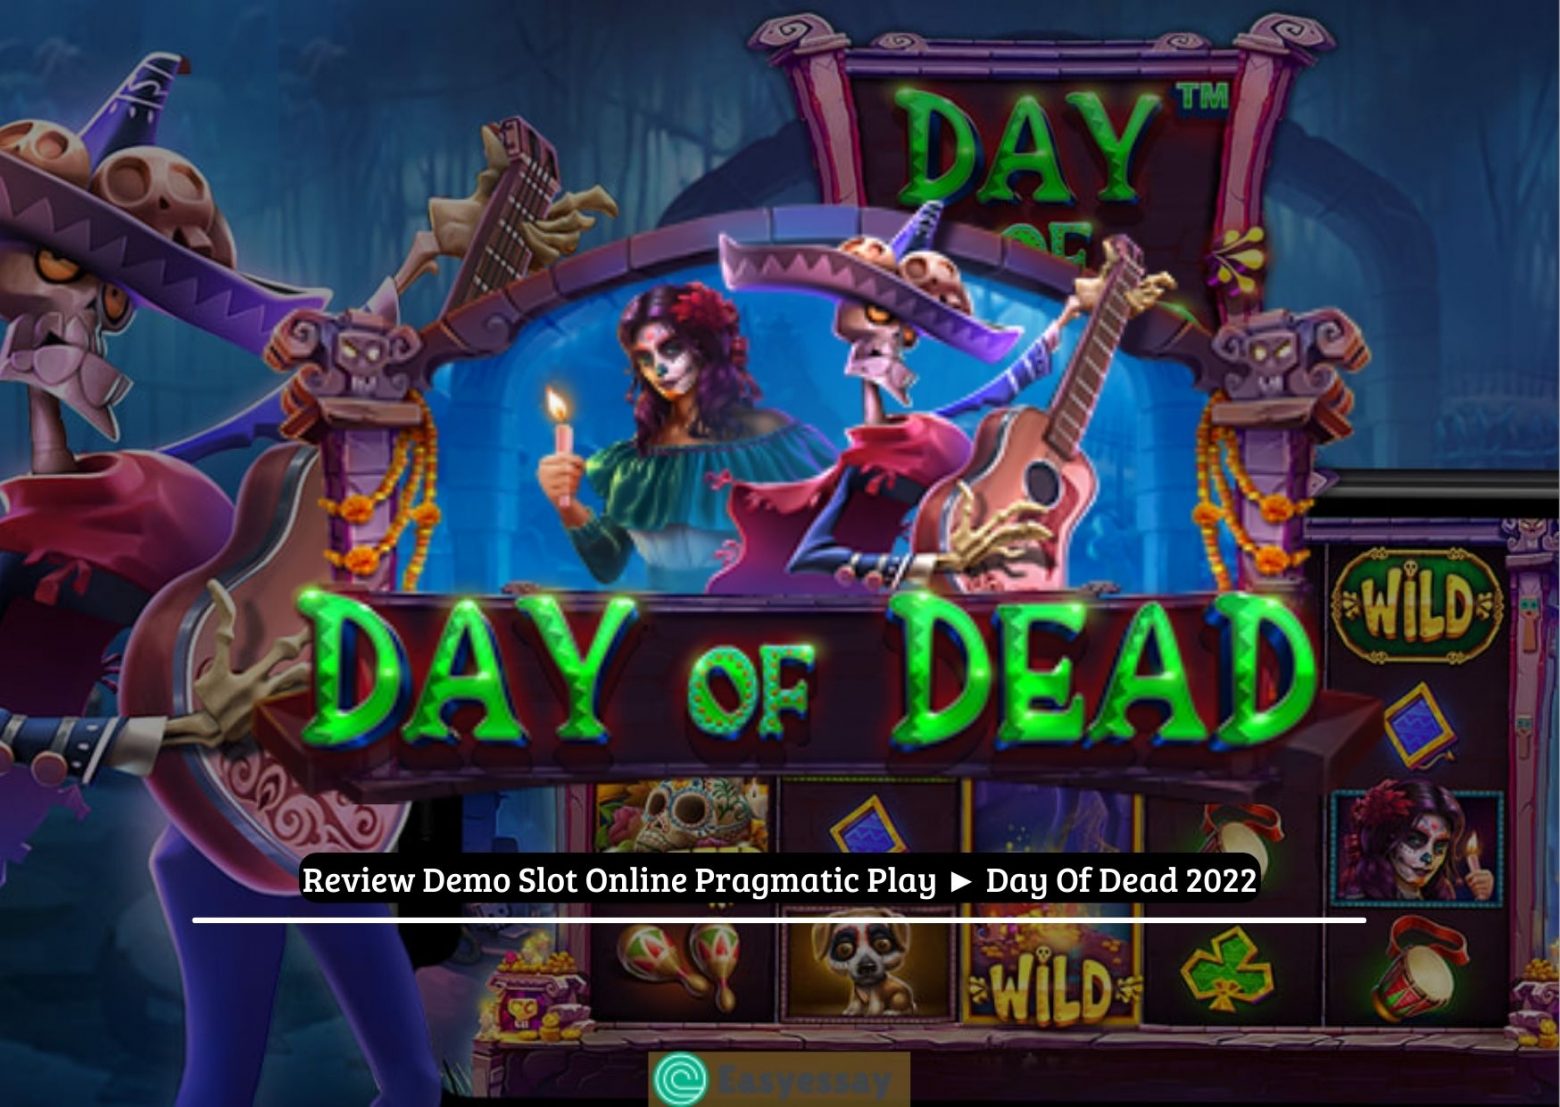 Review Demo Slot Online Pragmatic Play ► Day Of Dead 2022